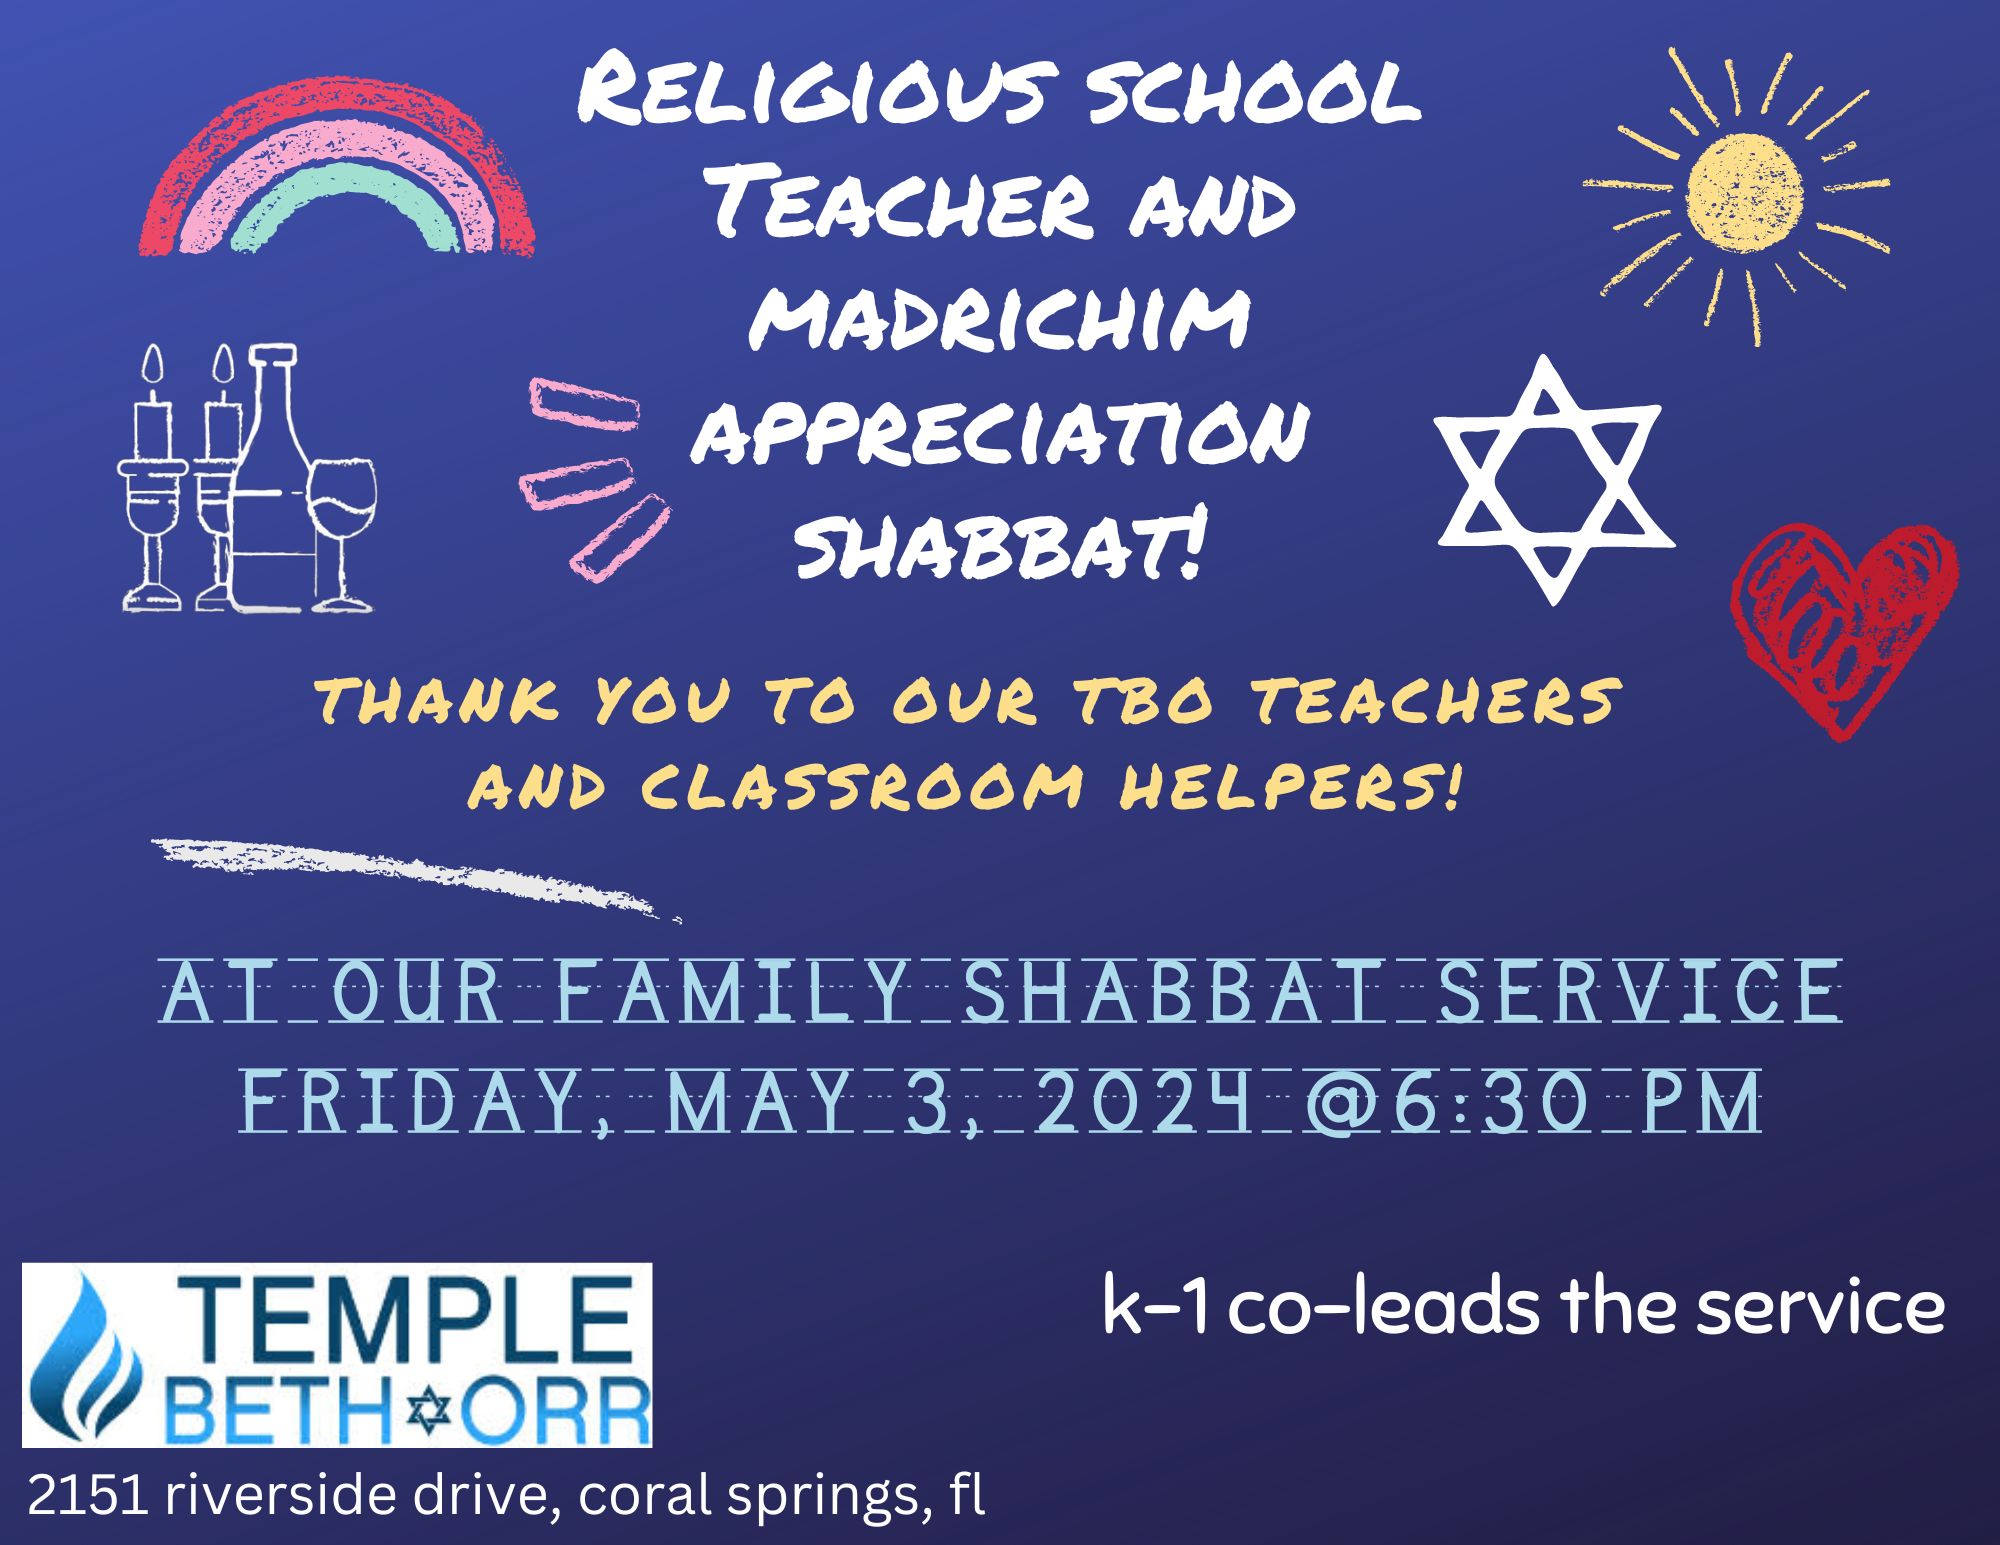 Come to our Teacher Appreciation Family Shabbat Service this Friday!